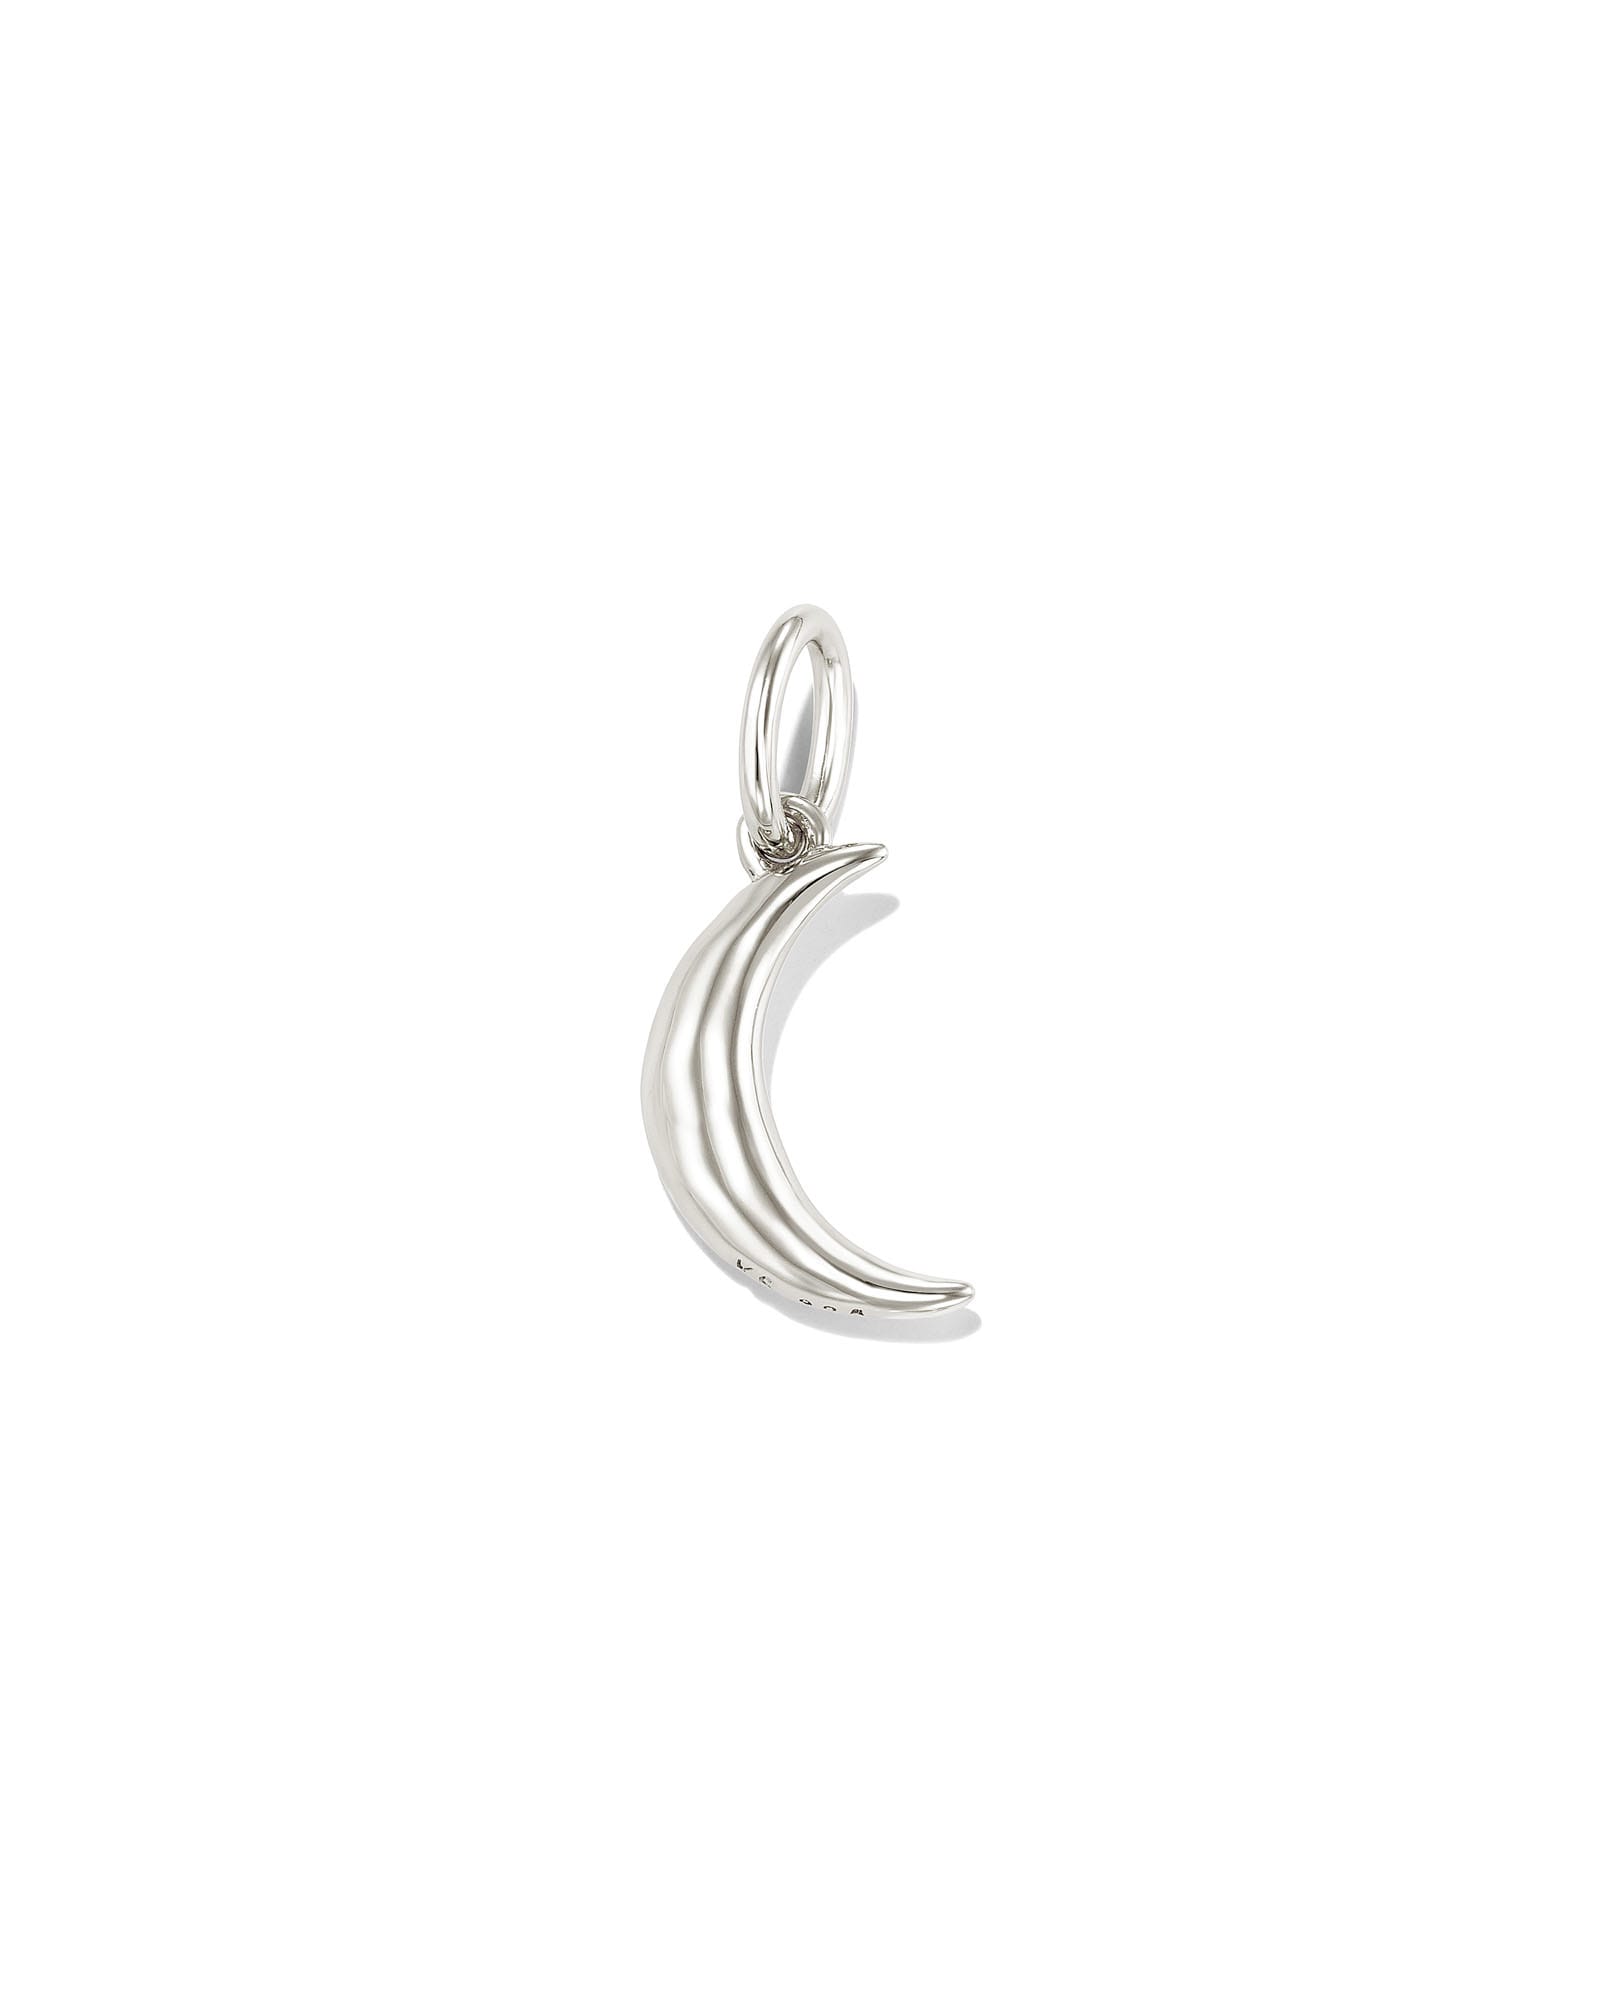 Moon Charm in Sterling Silver